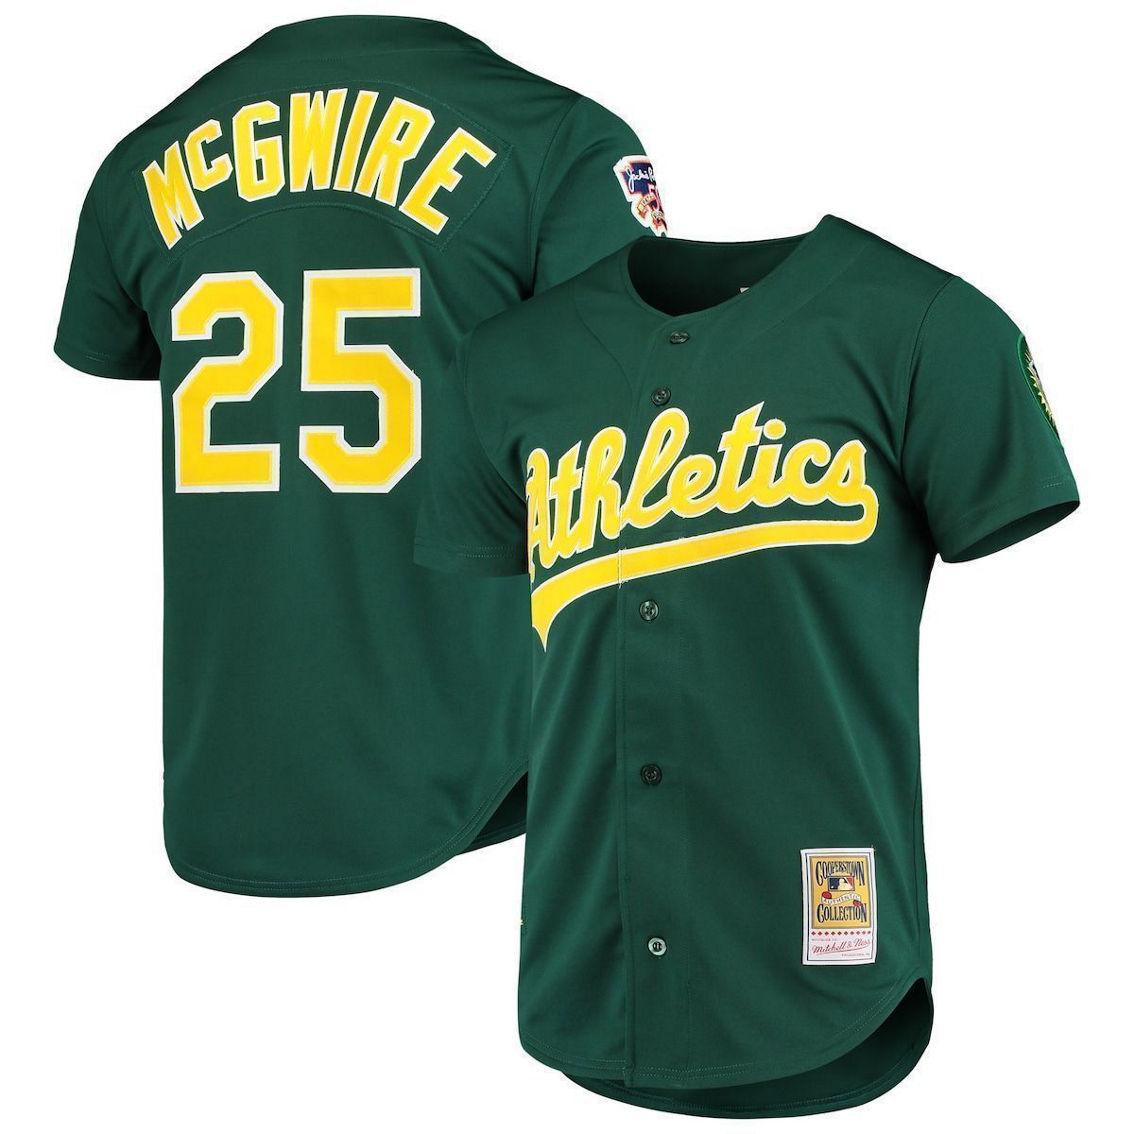 Mitchell & Ness Men's Mark McGwire Green Oakland Athletics 1997 Cooperstown Collection Authentic Jersey - Image 2 of 4